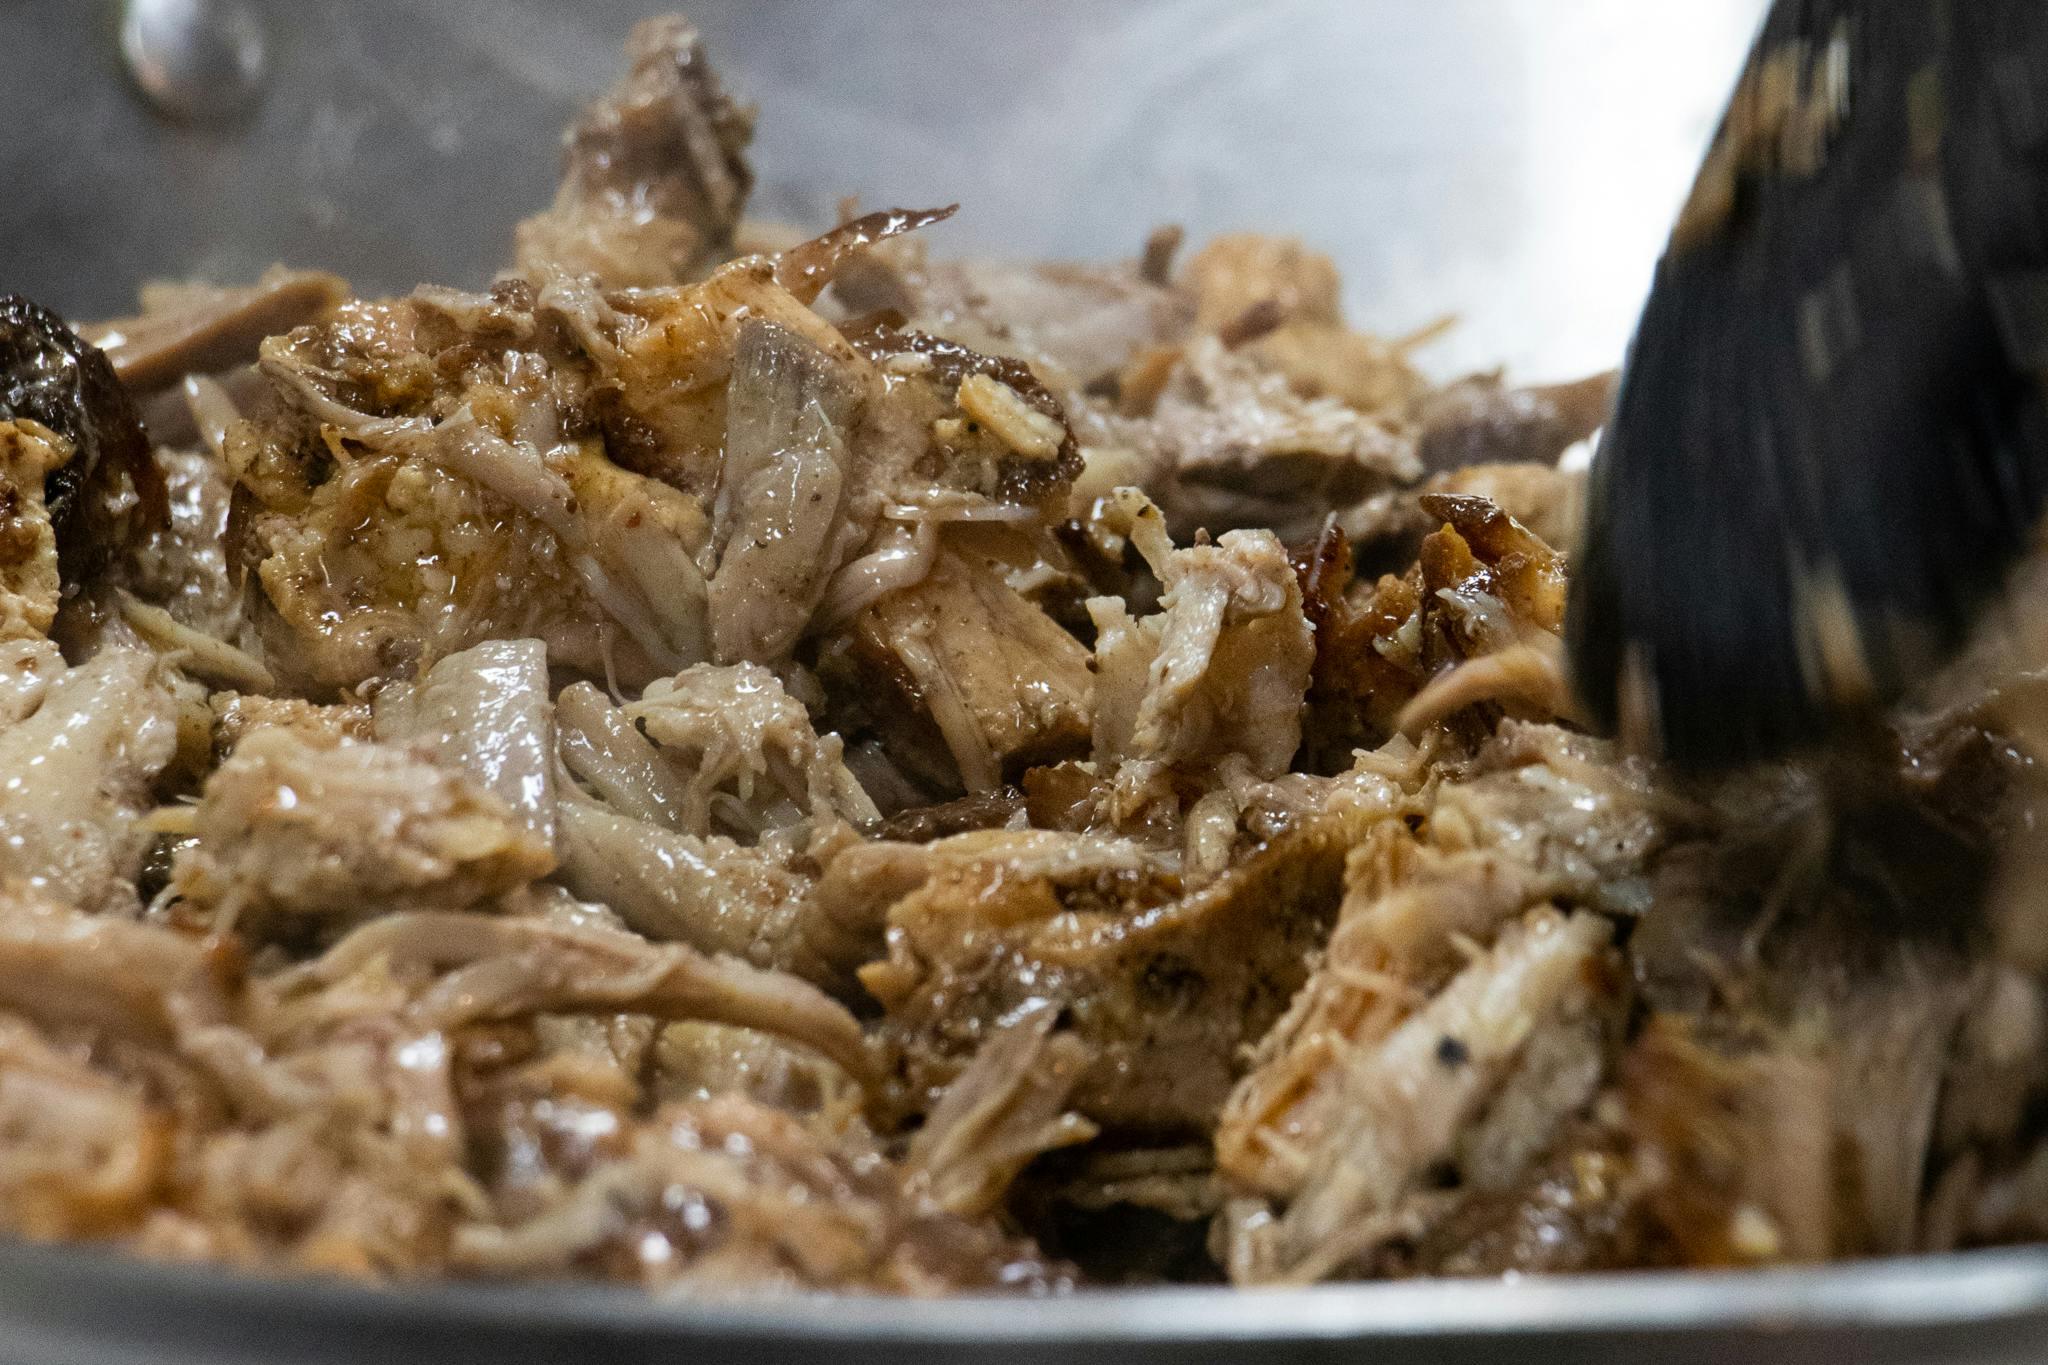 Carnitas being cooked